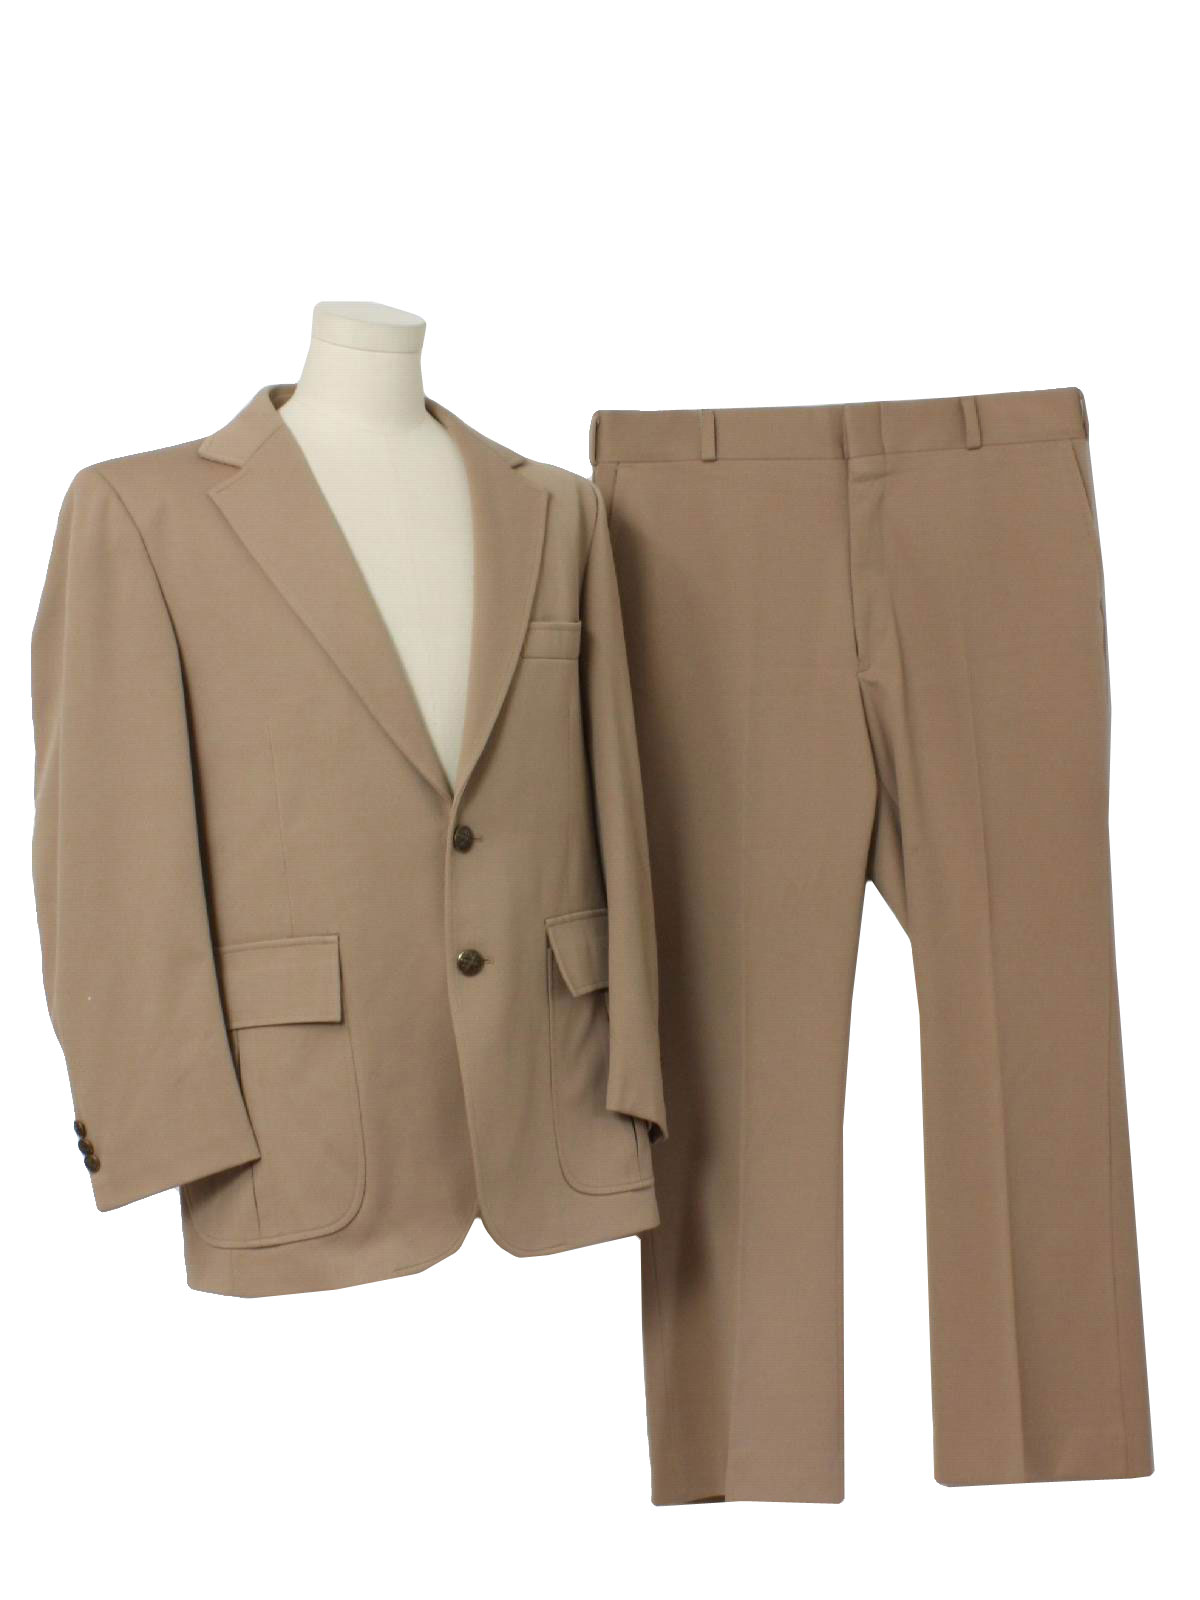 1970's Vintage JCPenney Suit: 70s -JCPenney- Mens taupe brown ...